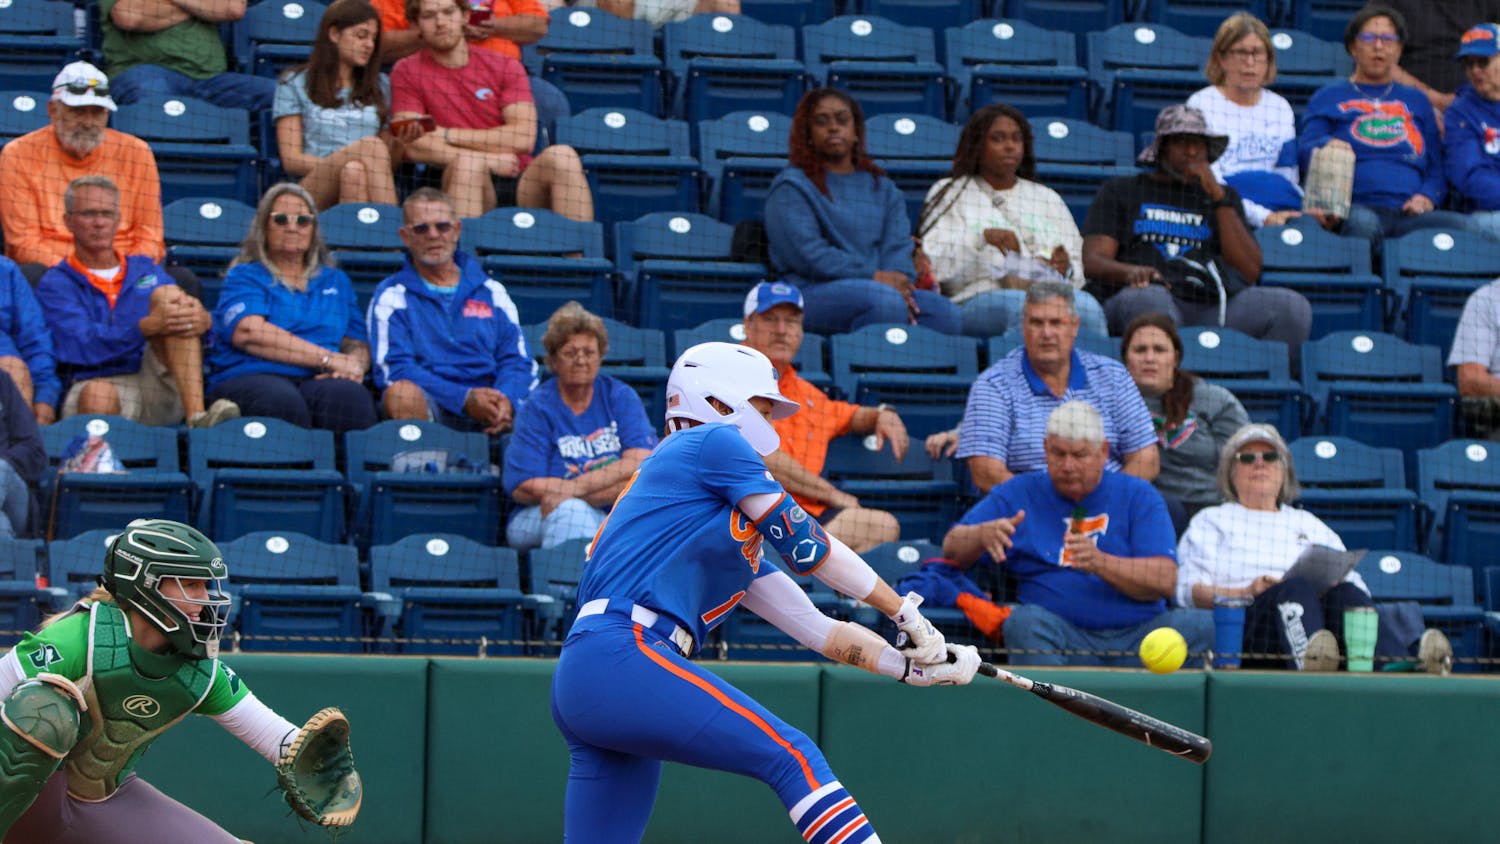 Florida shortstop Skylar Wallace swings her bat in the Gators' 8-0 mercy-rule victory over the Stetson Hatters Wednesday, March 29, 2023.